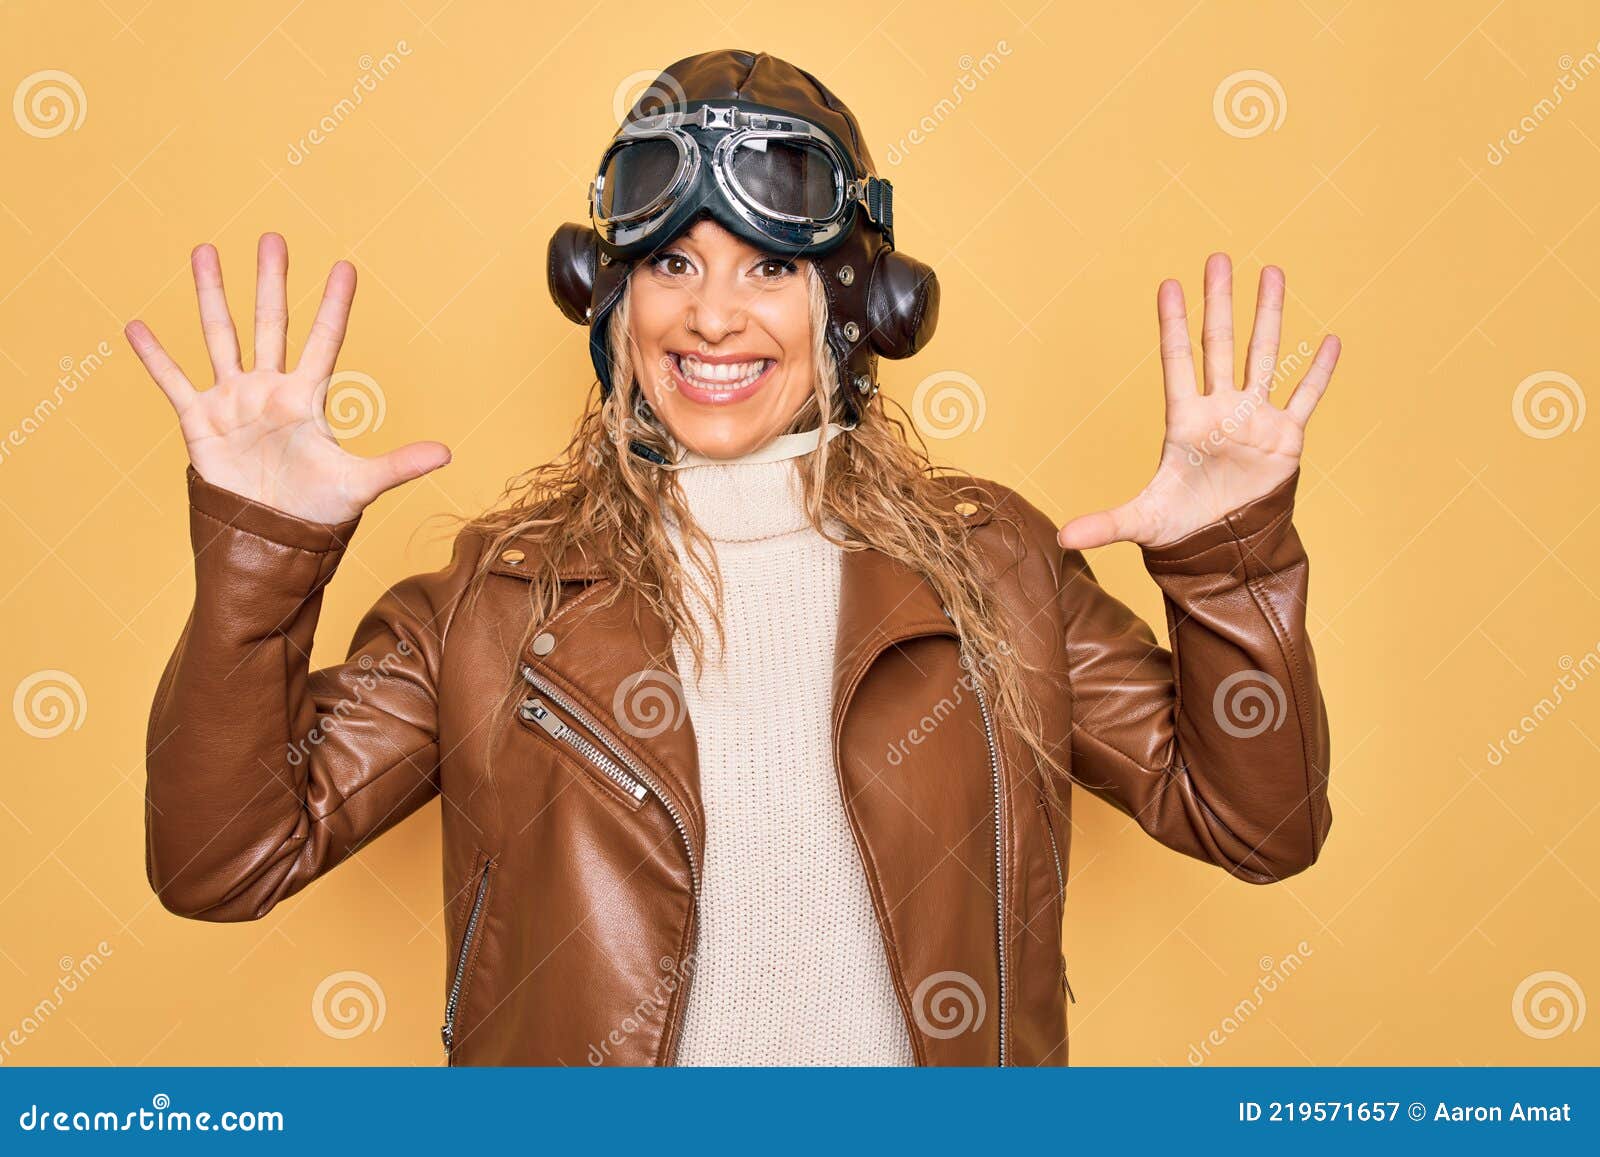 Young Beautiful Blonde Aviator Woman Wearing Vintage Pilot Helmet Whit Glasses And Jacket 